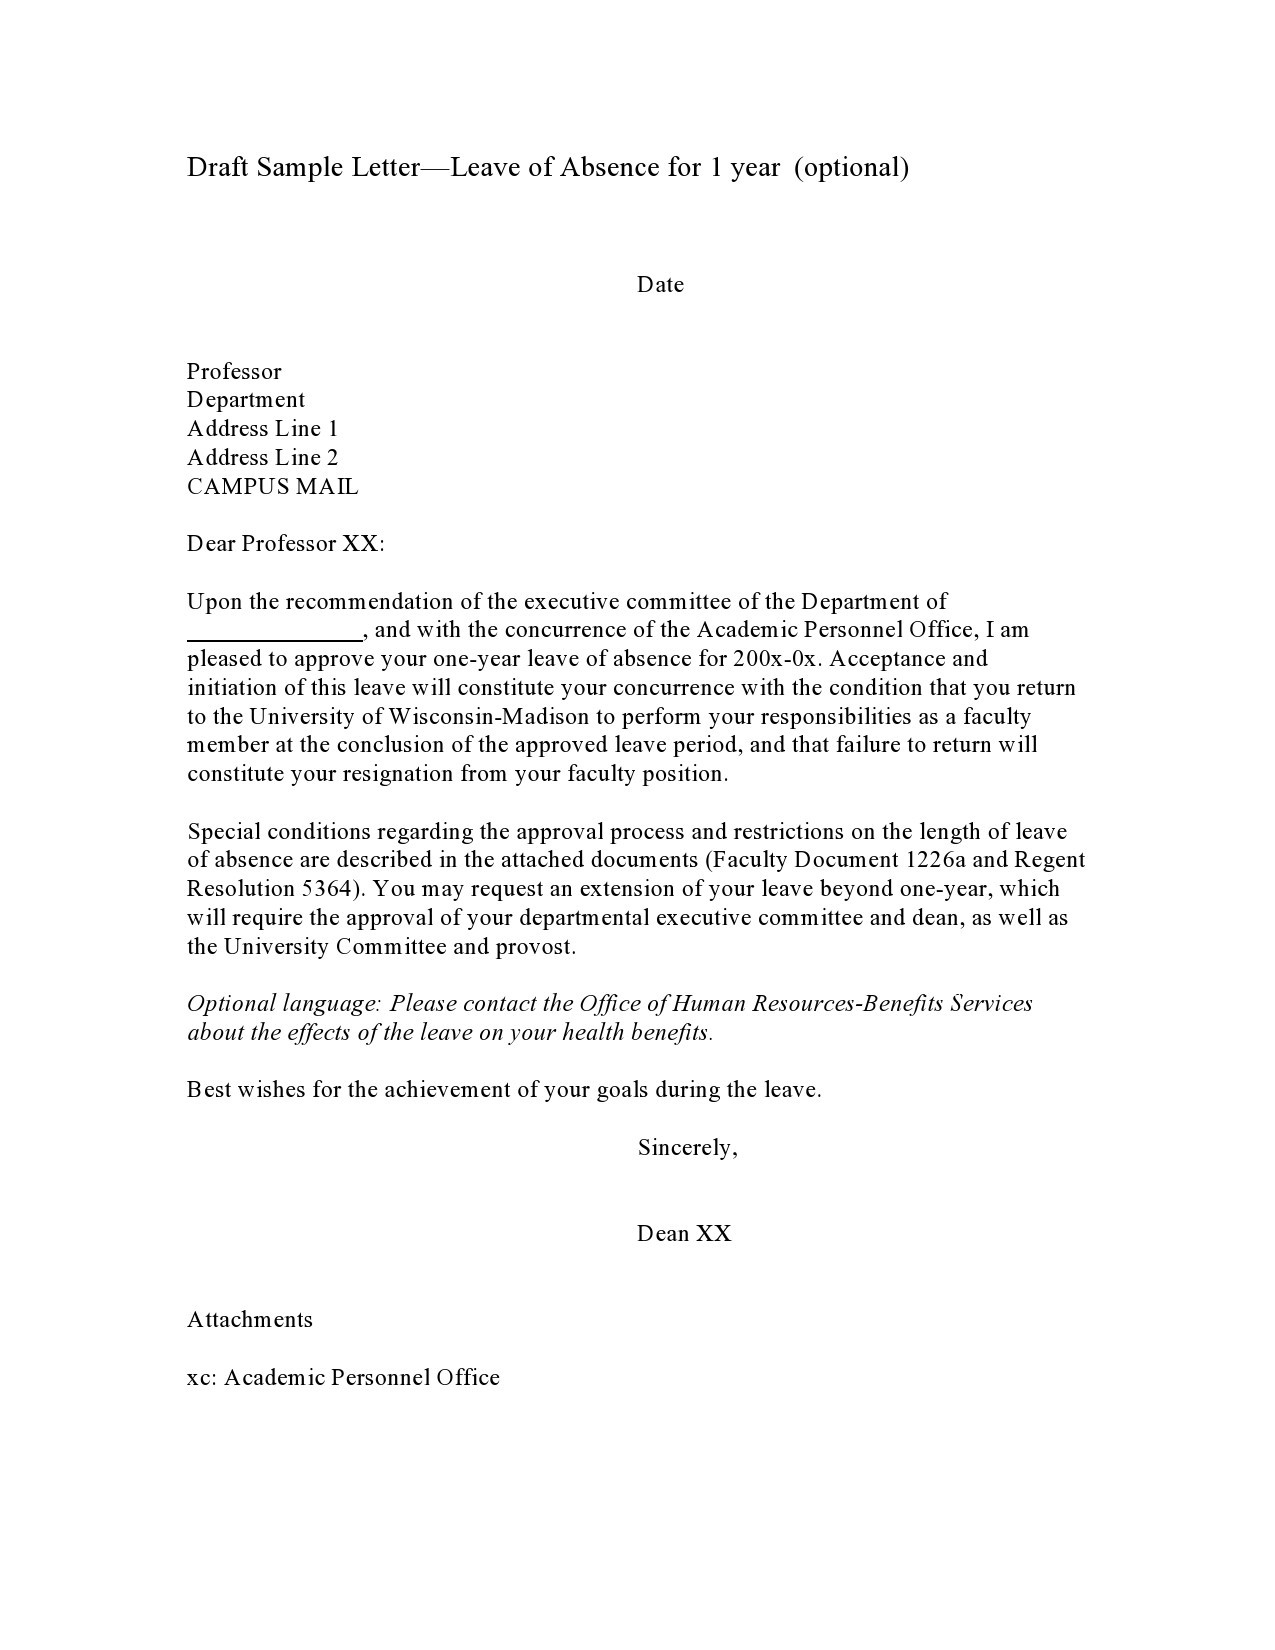 Letter Of Absence To College Professor Sample from templatelab.com